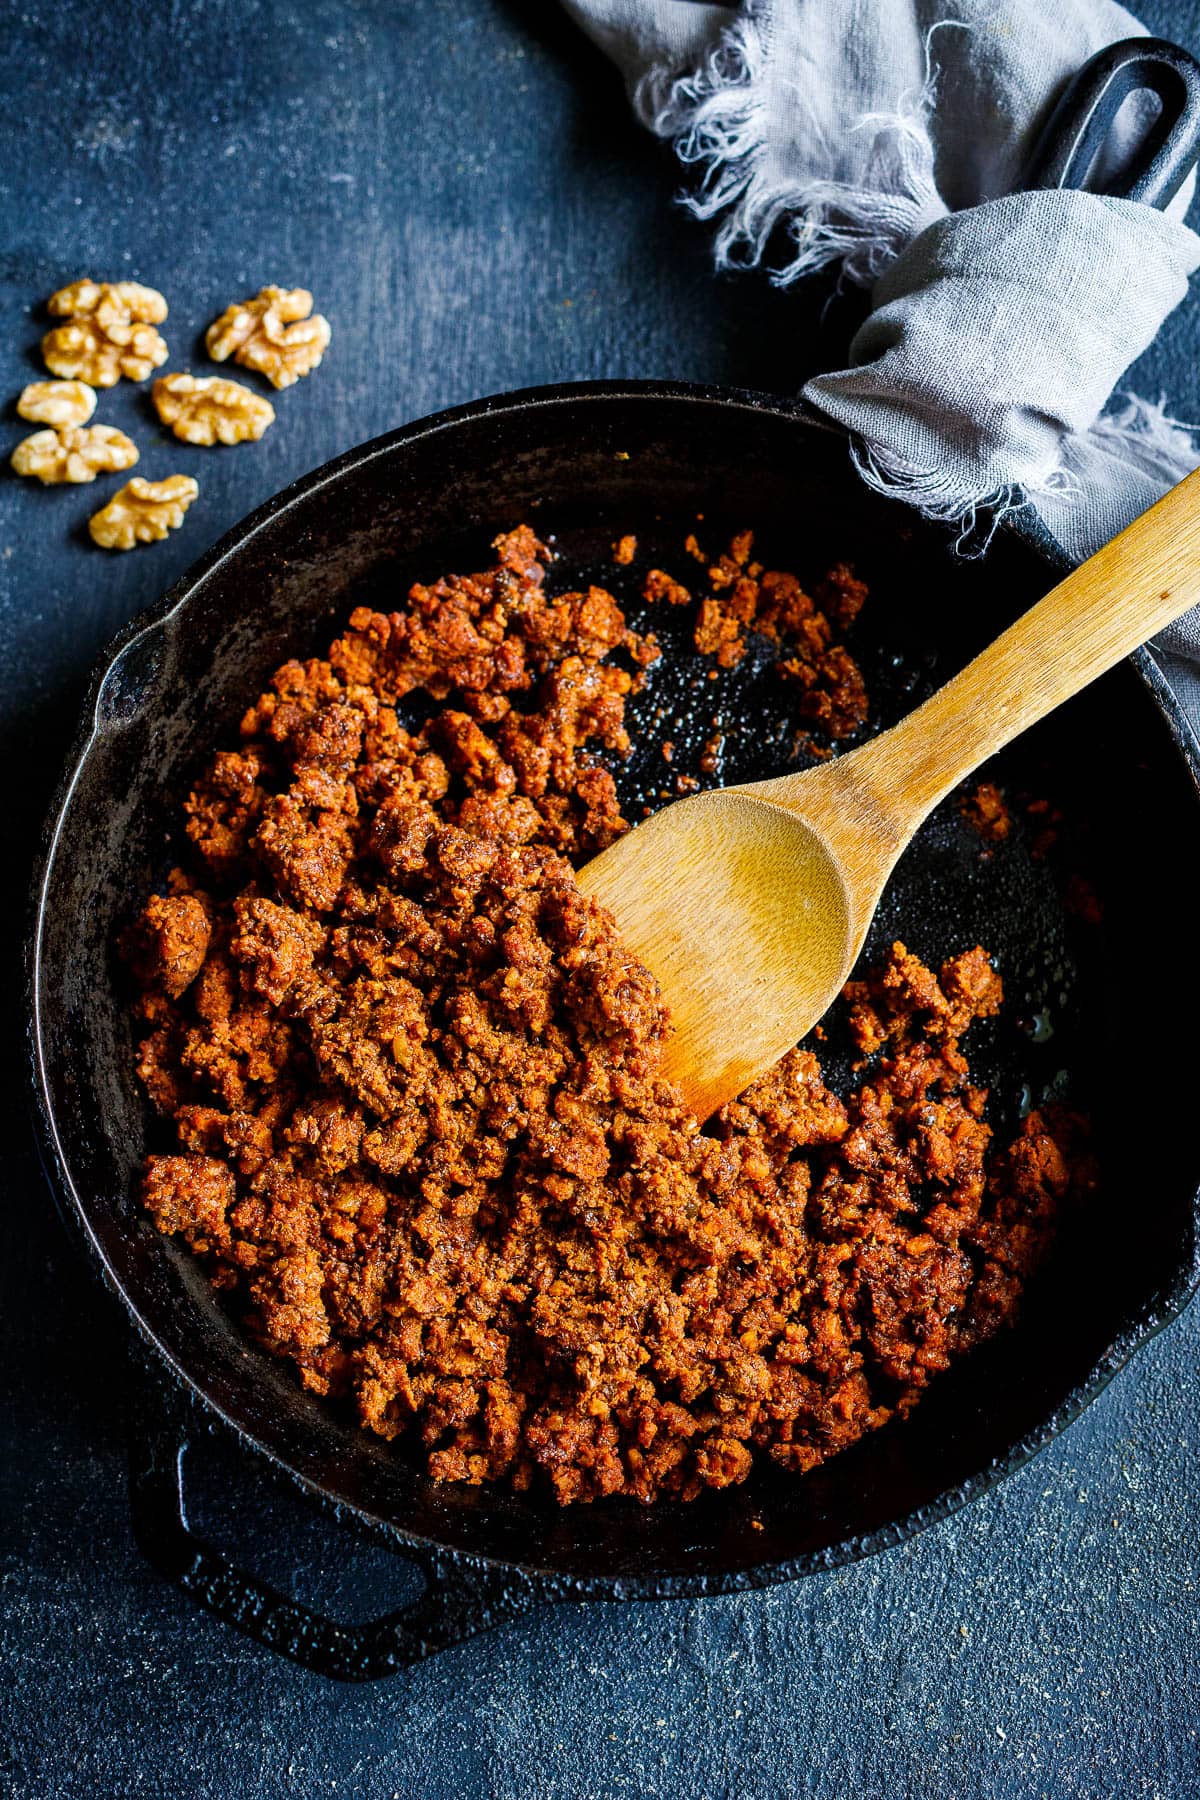 Smoky, savory, spicy Vegan Chorizo made with walnuts and lentils and Mexican Spices- a tasty plant-based alternative to chorizo to use in tacos, tostadas, quesadillas, burritos, burrito bowls, nachos or breakfast bowls. Make it ahead and keep it in the fridge for busy weeknights! 